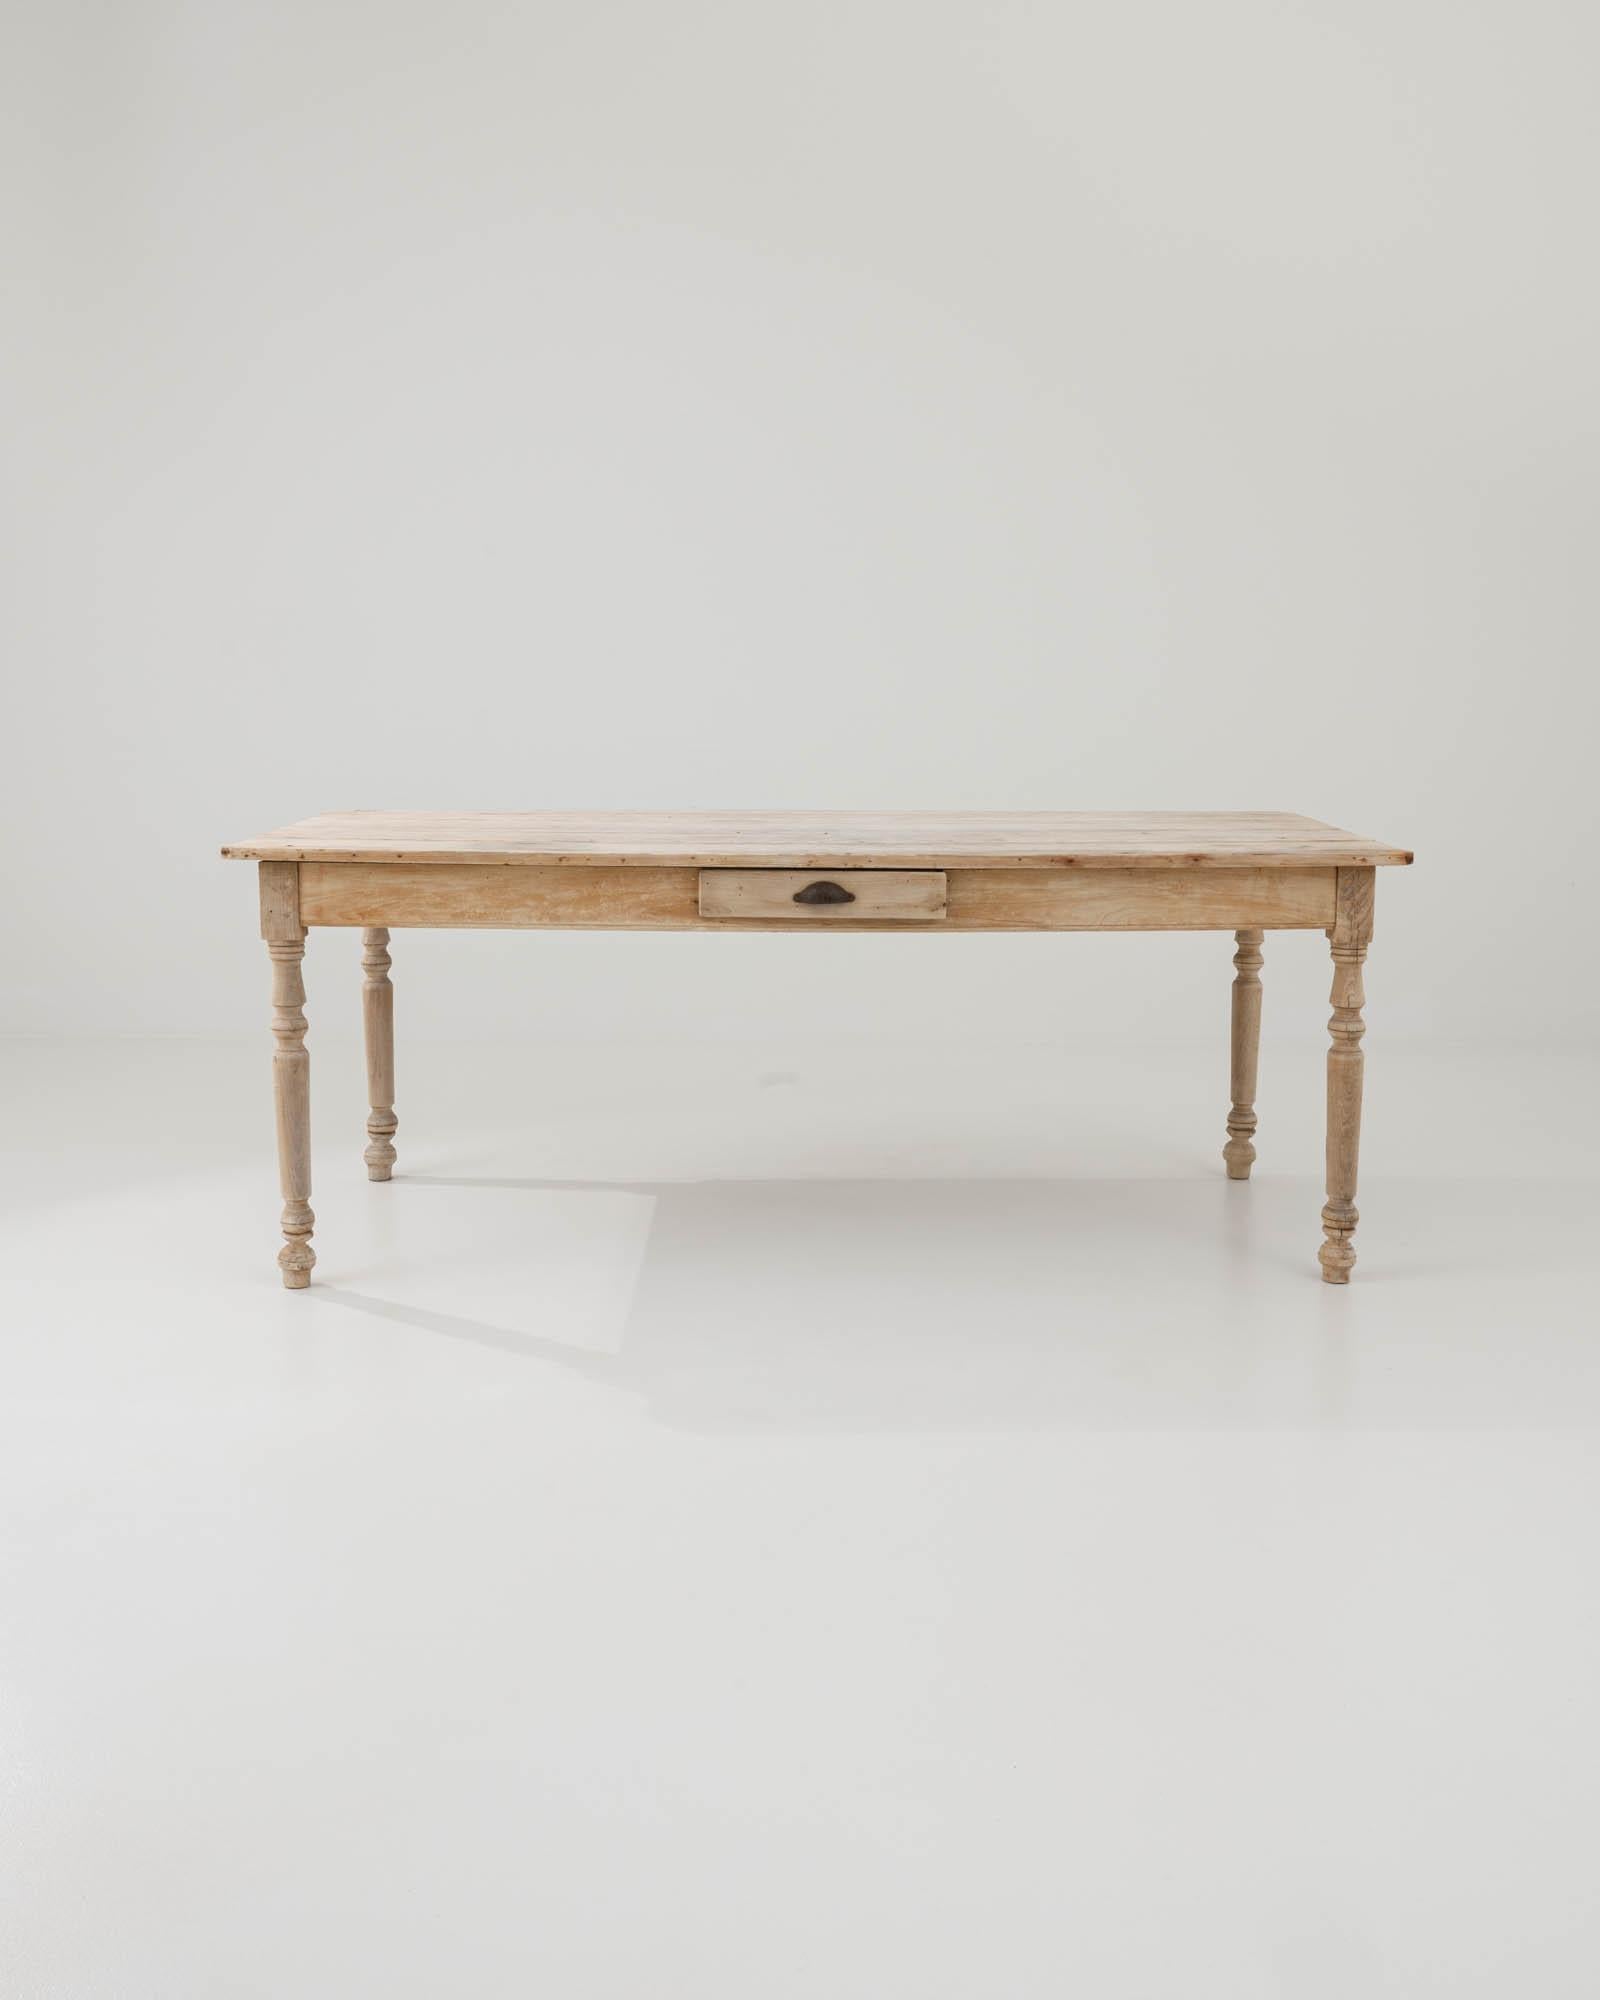 Introducing the 1900s French Bleached Oak Dining Table, a timeless piece bringing a slice of vintage charm into your dining space. Crafted from rich, bleached oak, this table exudes rustic elegance with its classic turned legs and the patina that